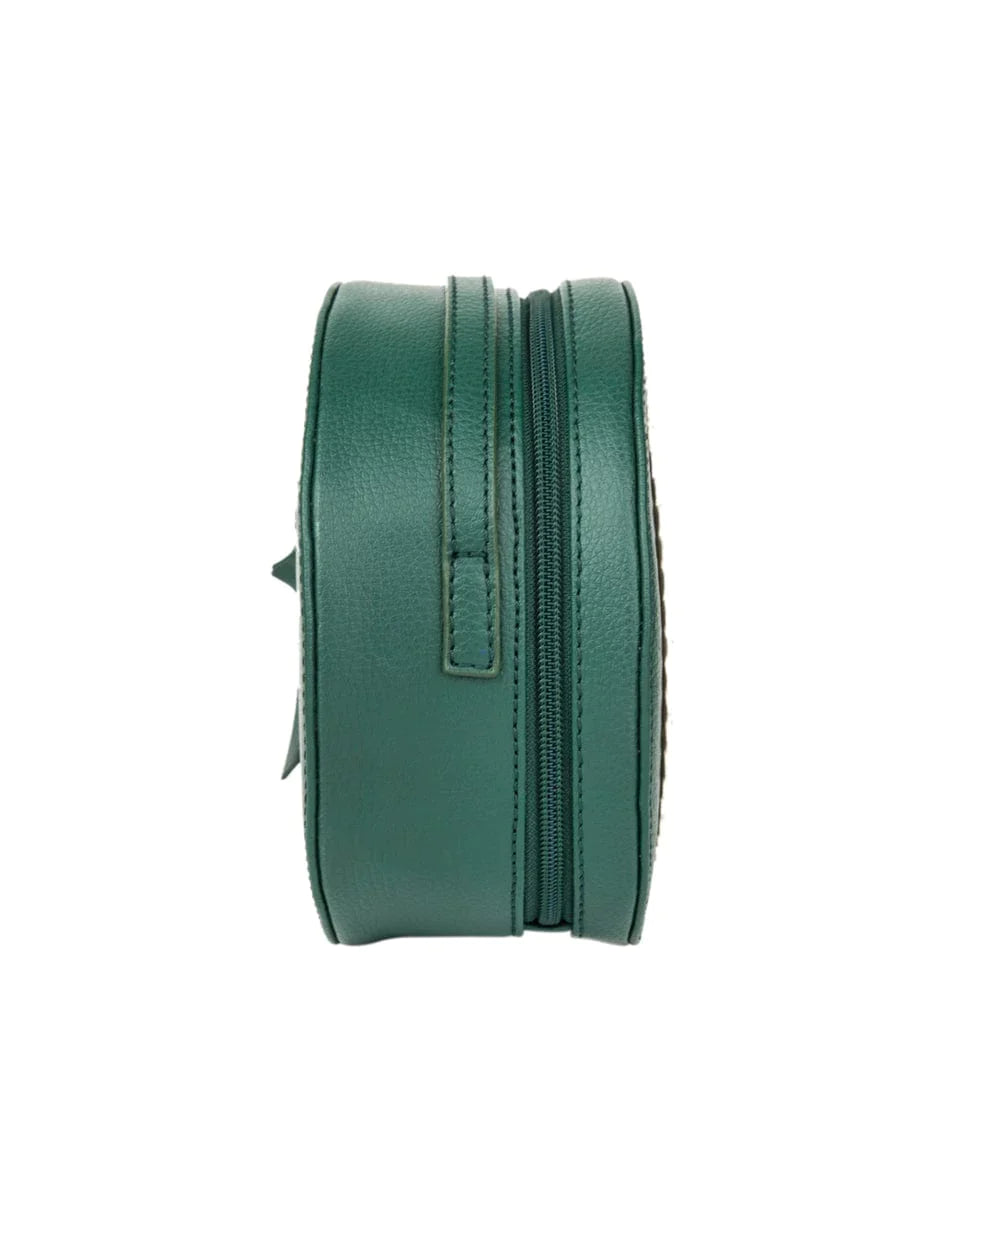 Strong Is The New Pretty Sling Bag Green - Chumbak